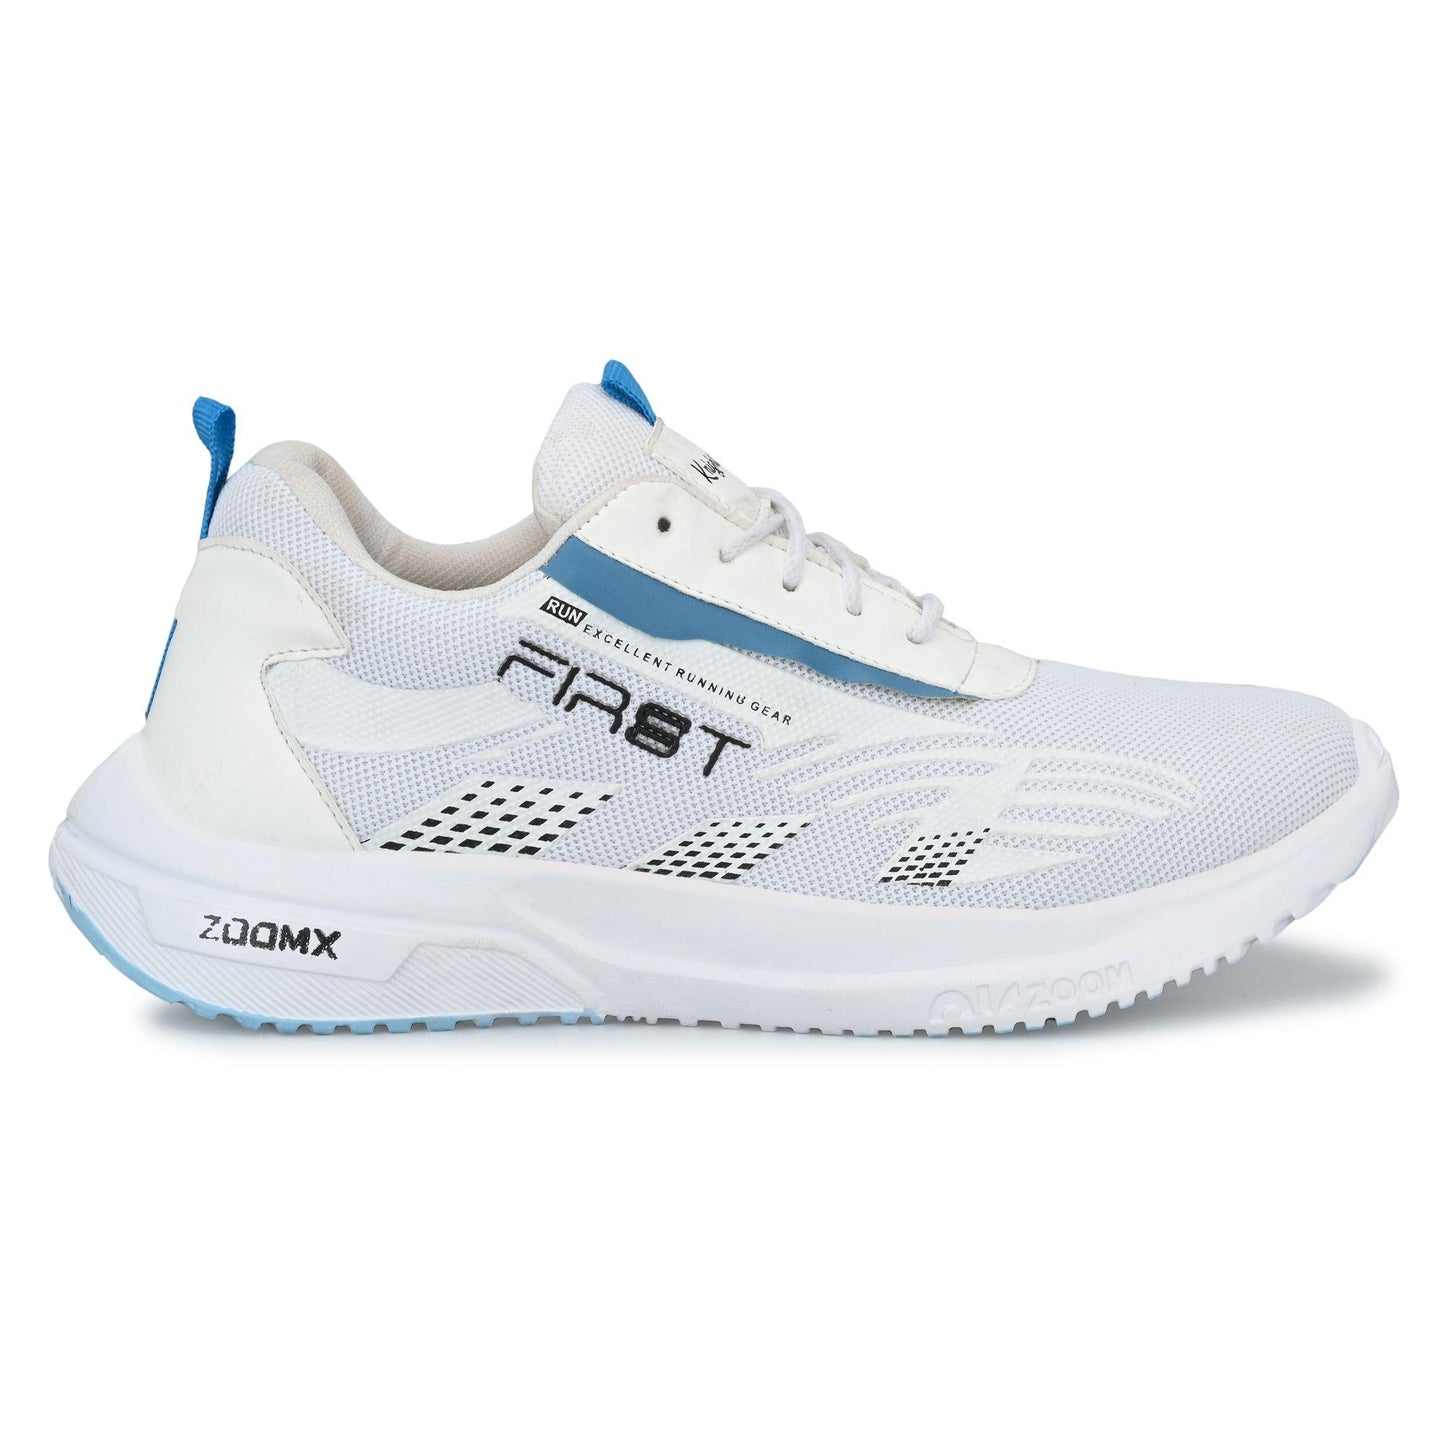 Knight Walkers Mesh Sneakers For Men White&Blue